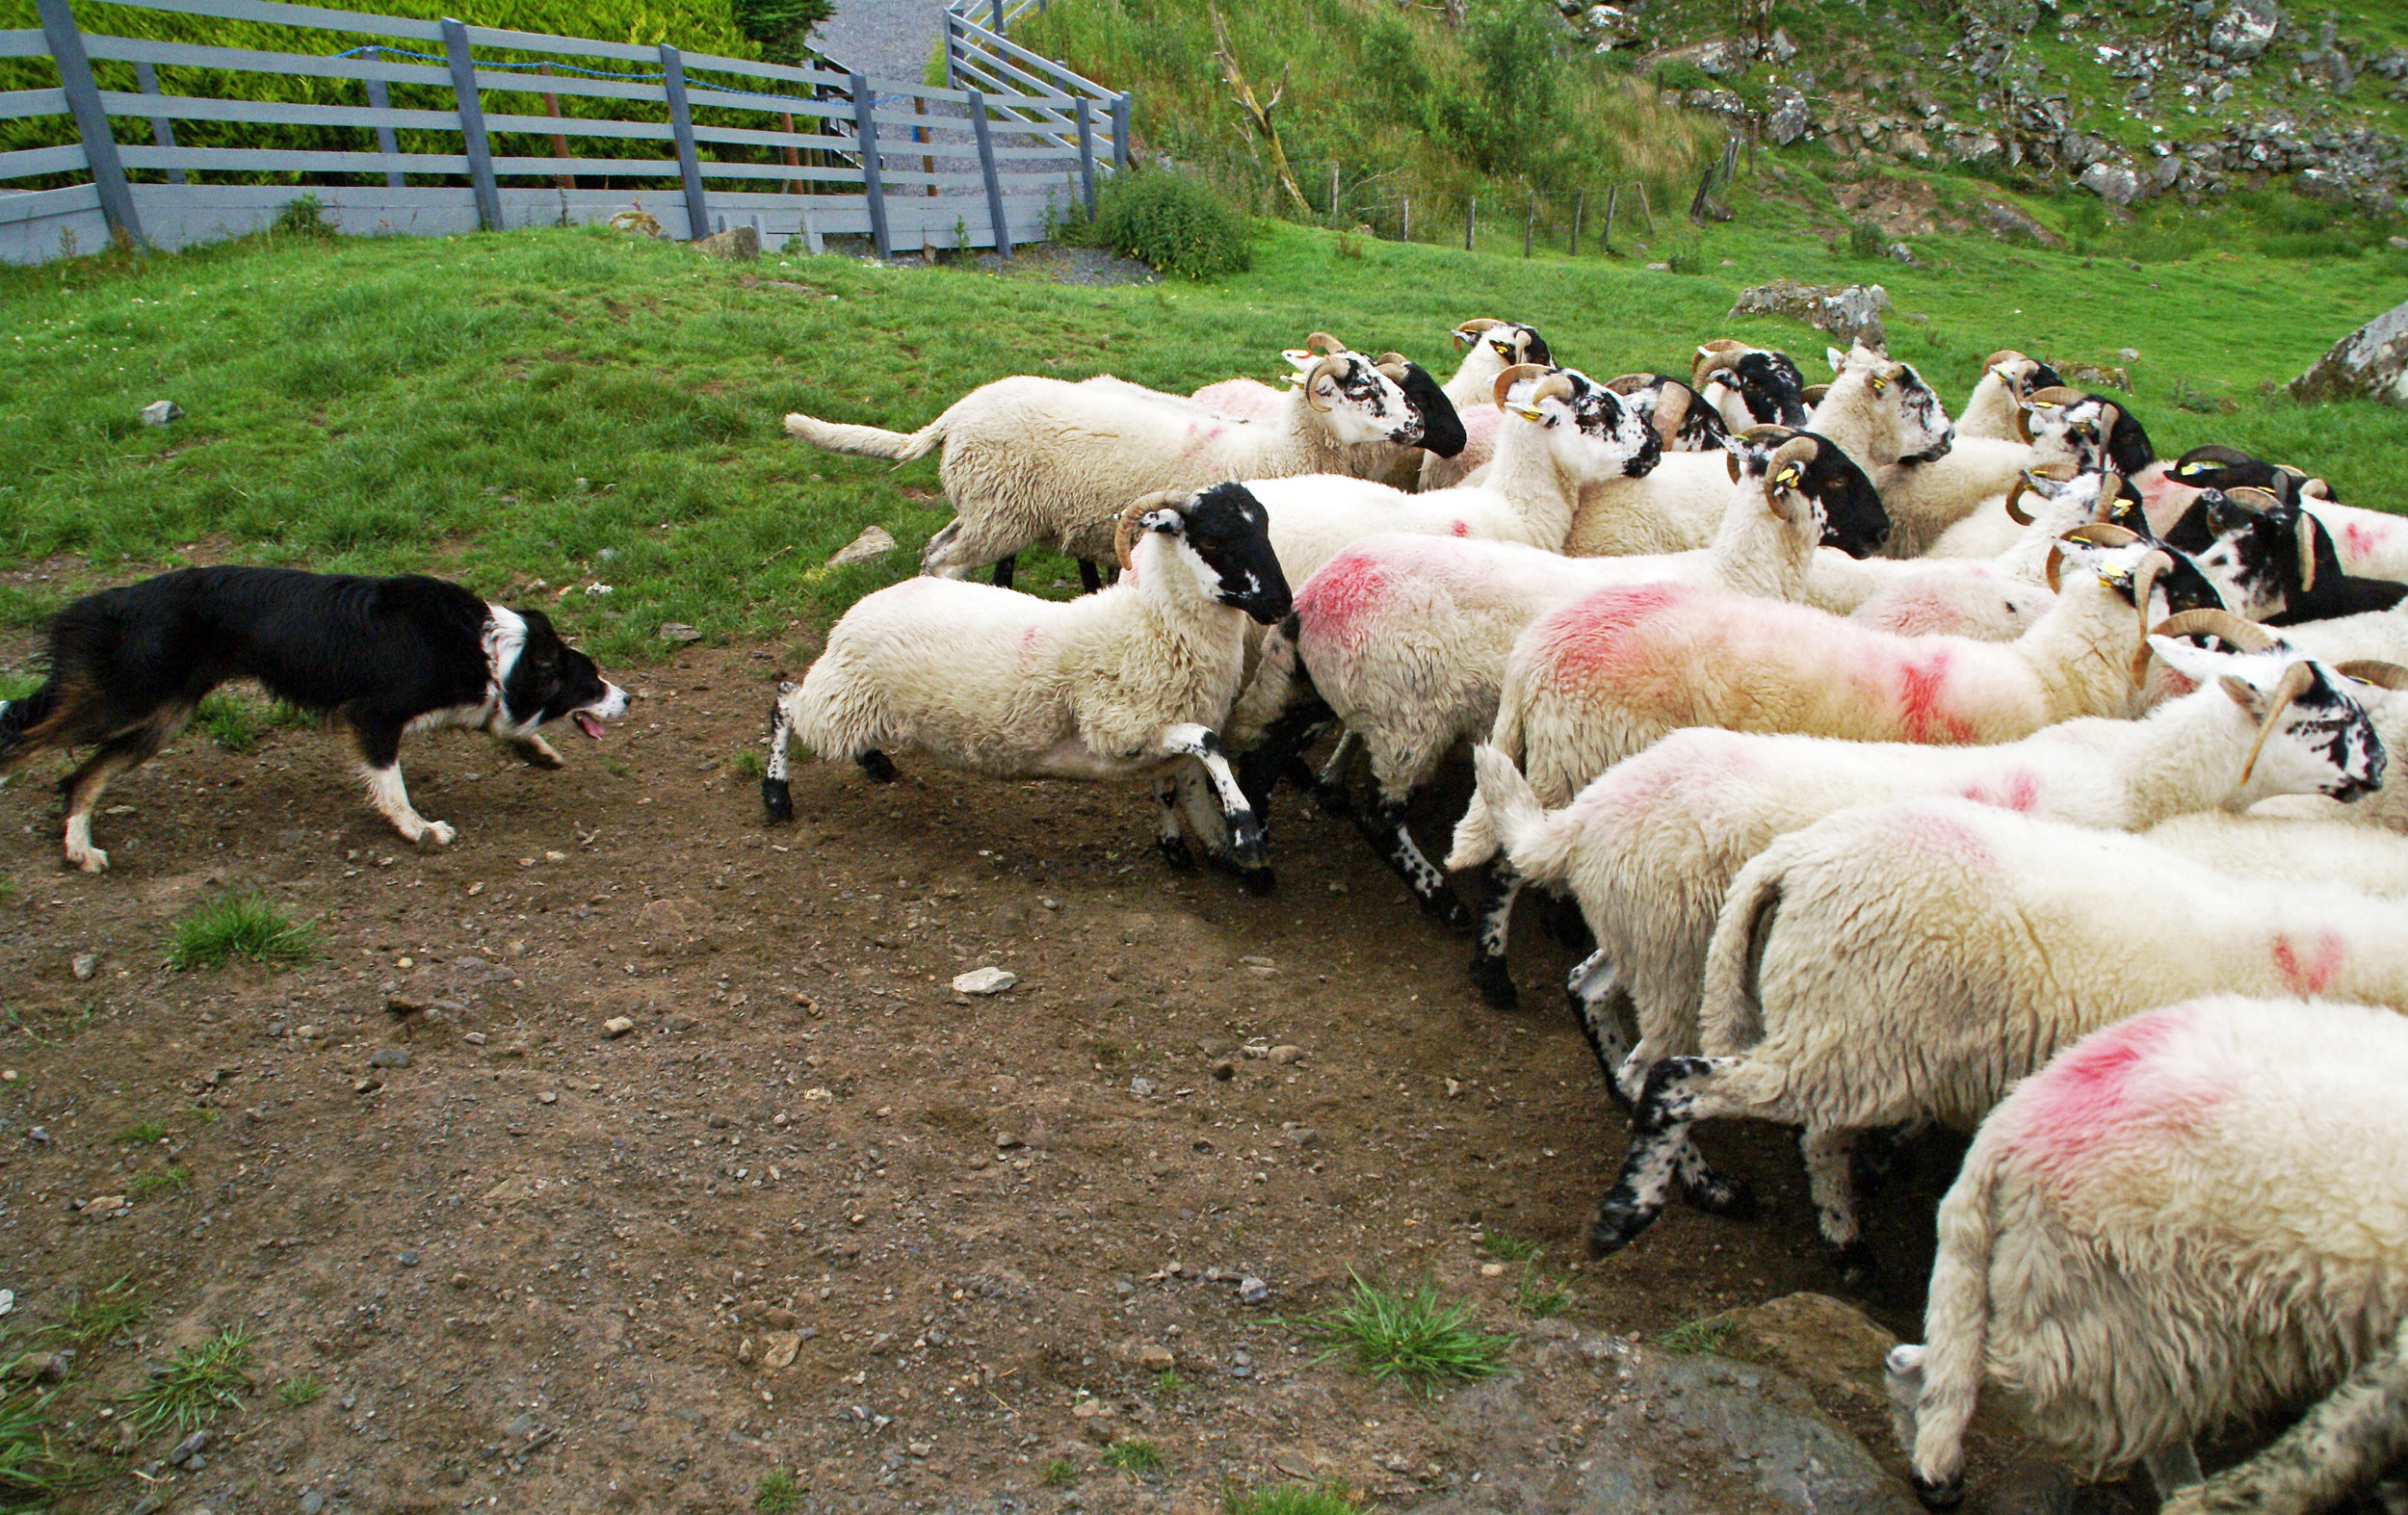  A Border Collie rounds up sheep at Kissane Sheep Farm. These Border Collies only respond to their trainer's voice when herding. If another person other than the trainer were to shout out the same commands, the dog wouldn't respond.&nbsp; 